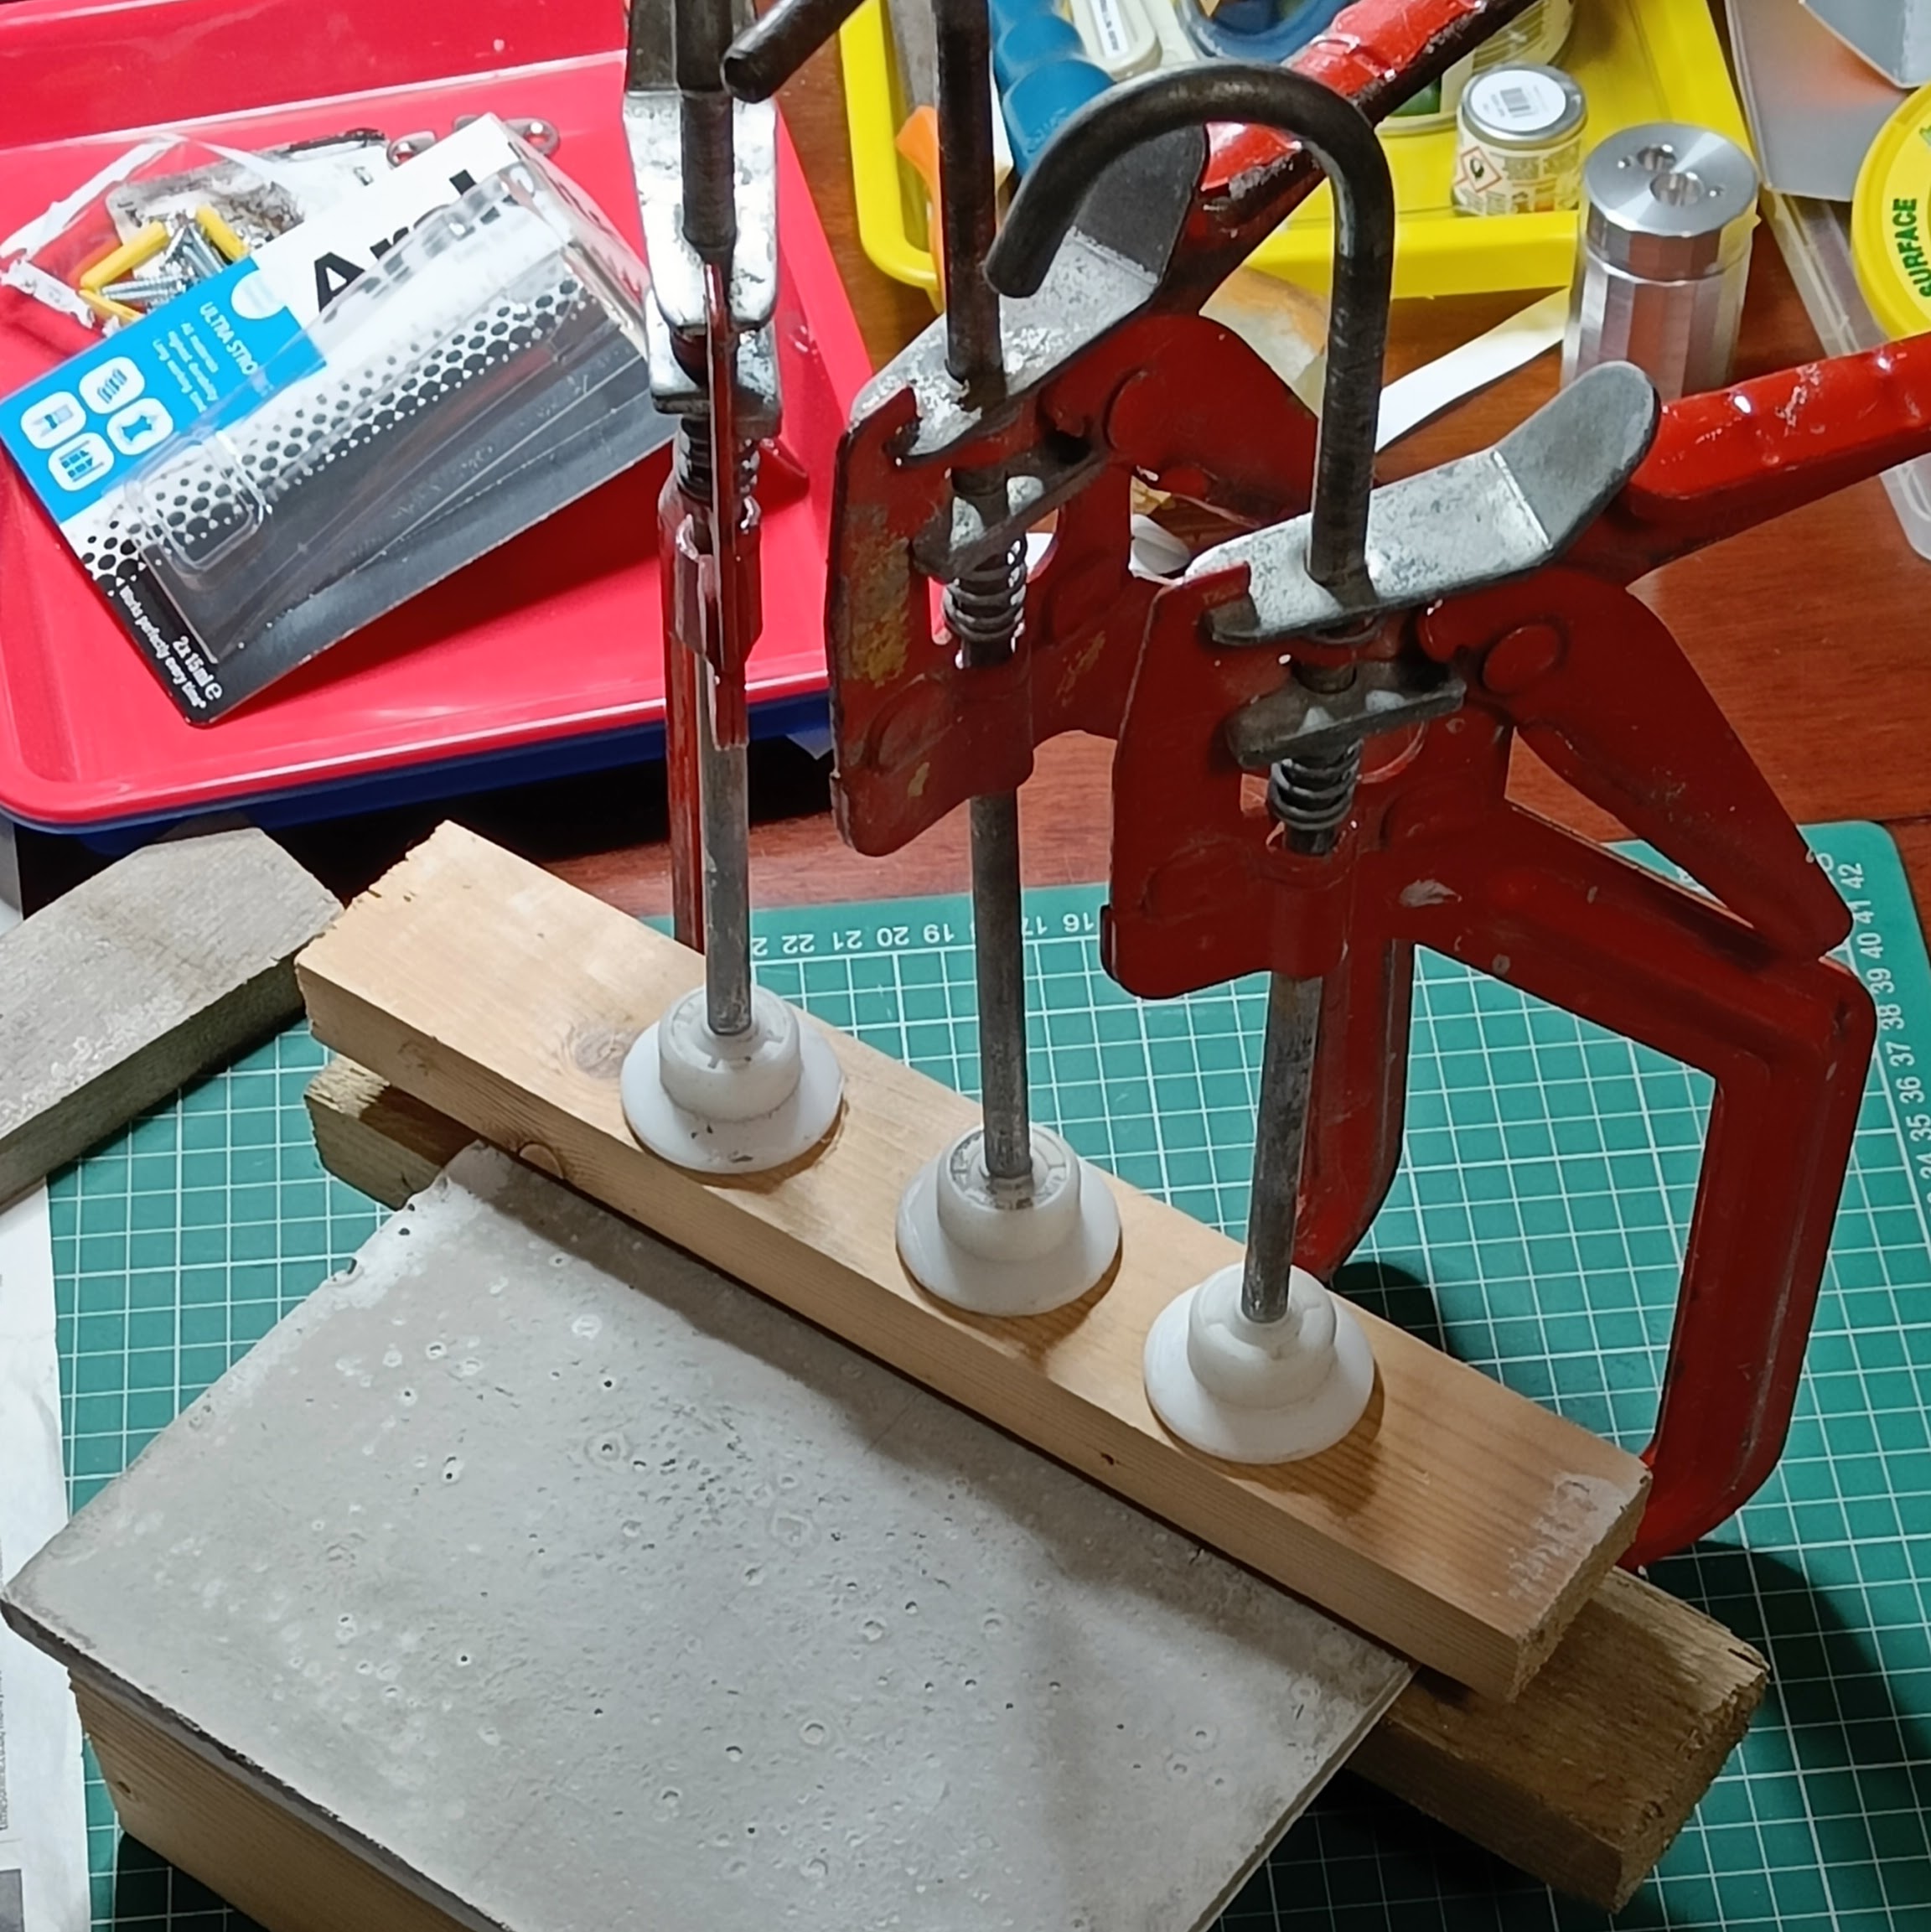 Three red metal clamps sit on my untidy desk and hold the
  concrete plaque in place between two pieces of wood. You can’t
  see the metal mounting plates that are being glued to the
  concrete plaque.